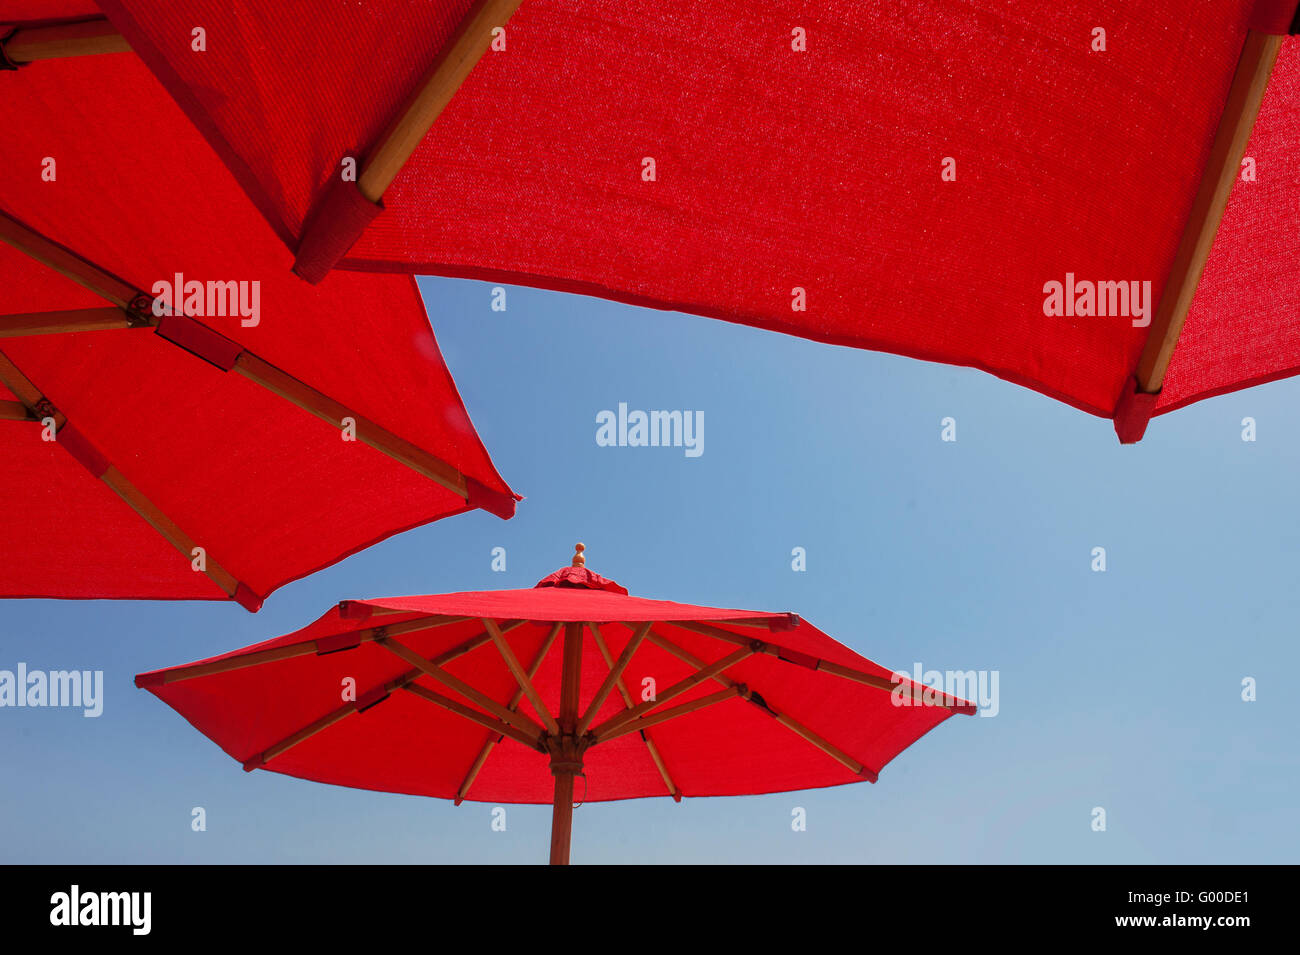 red umbrellas on blue sky background Stock Photo